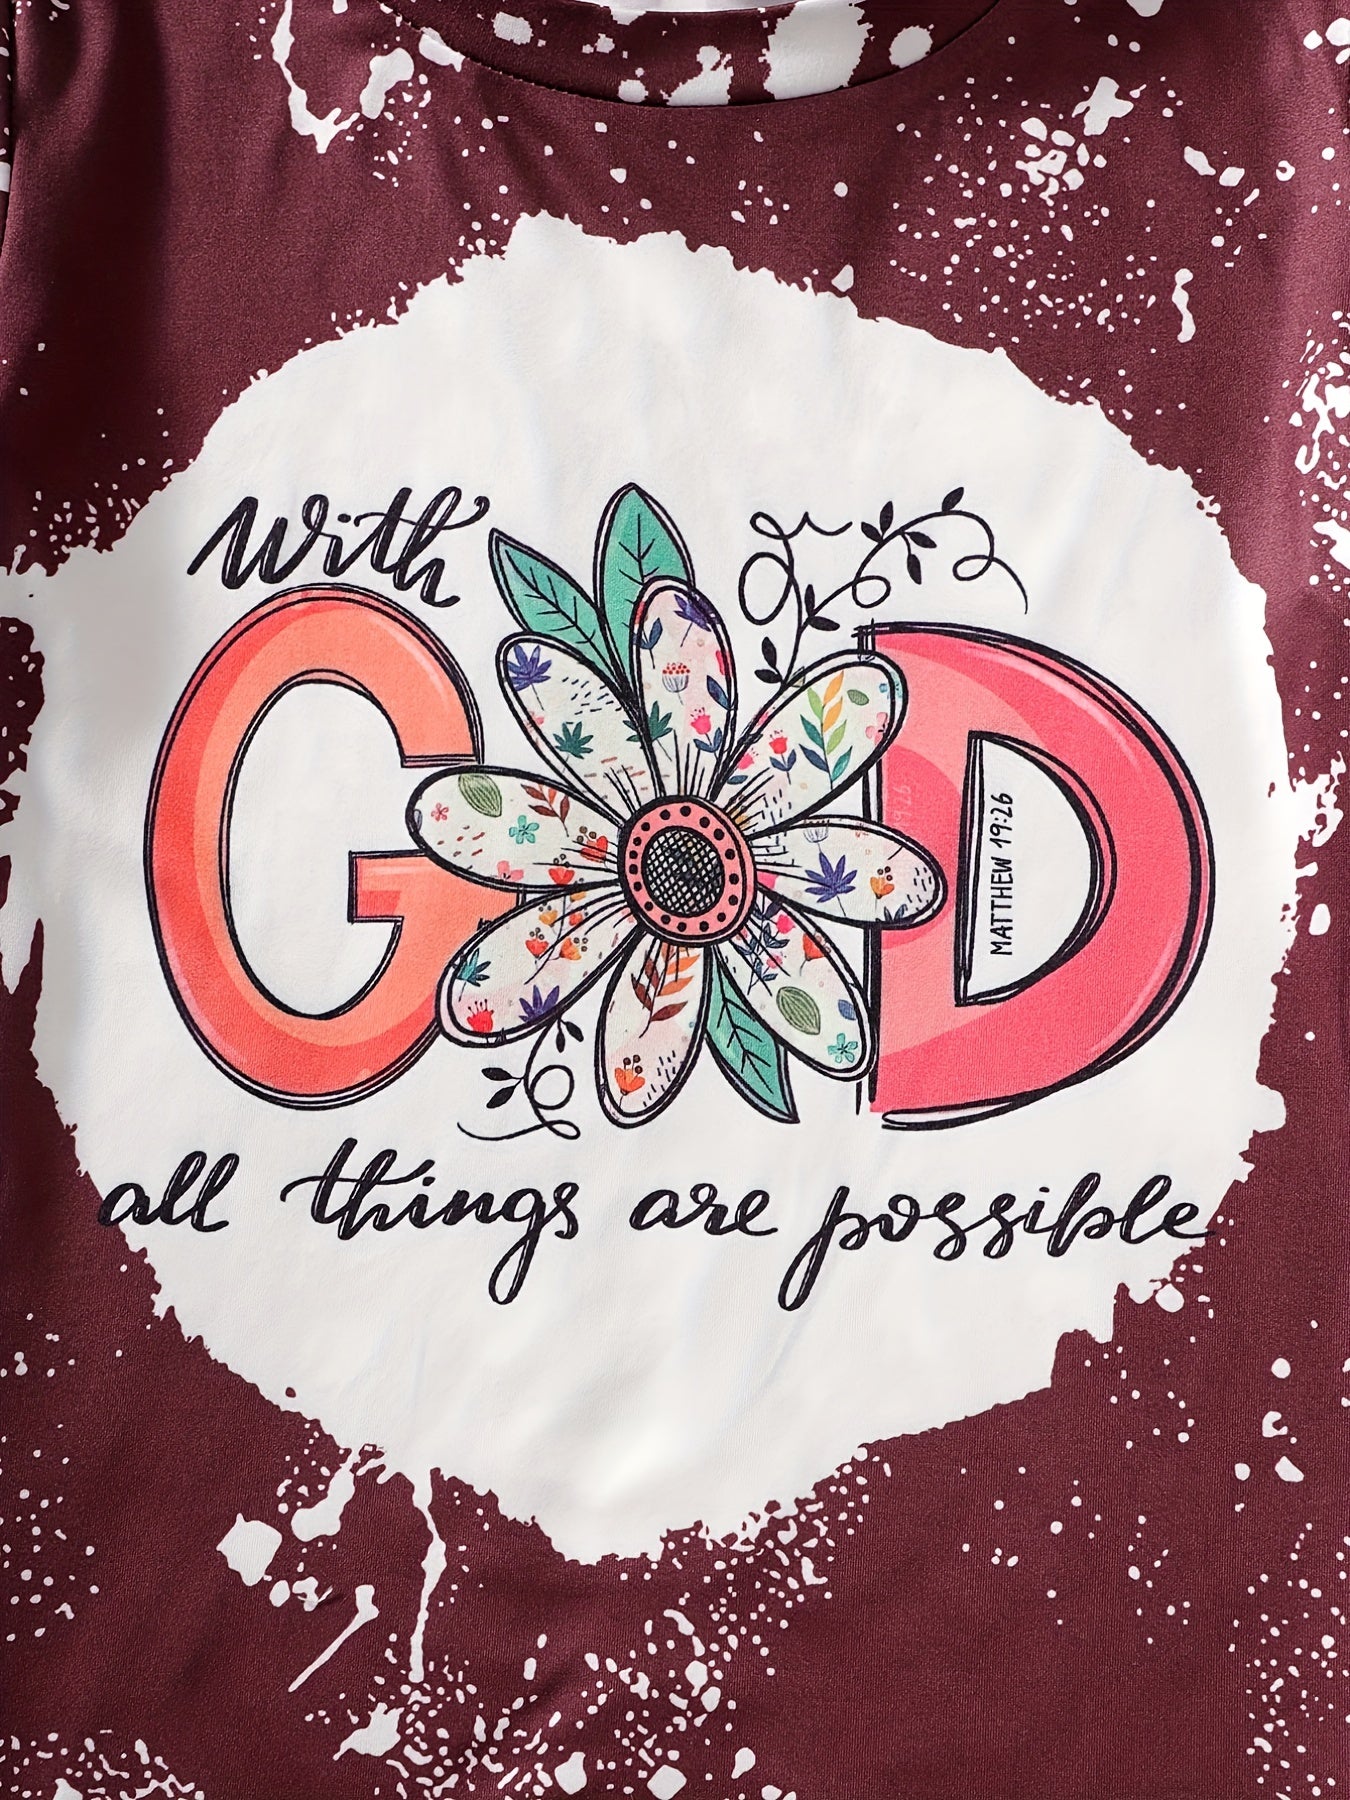 With God All Things Are Possible Youth Christian Casual Outfit claimedbygoddesigns